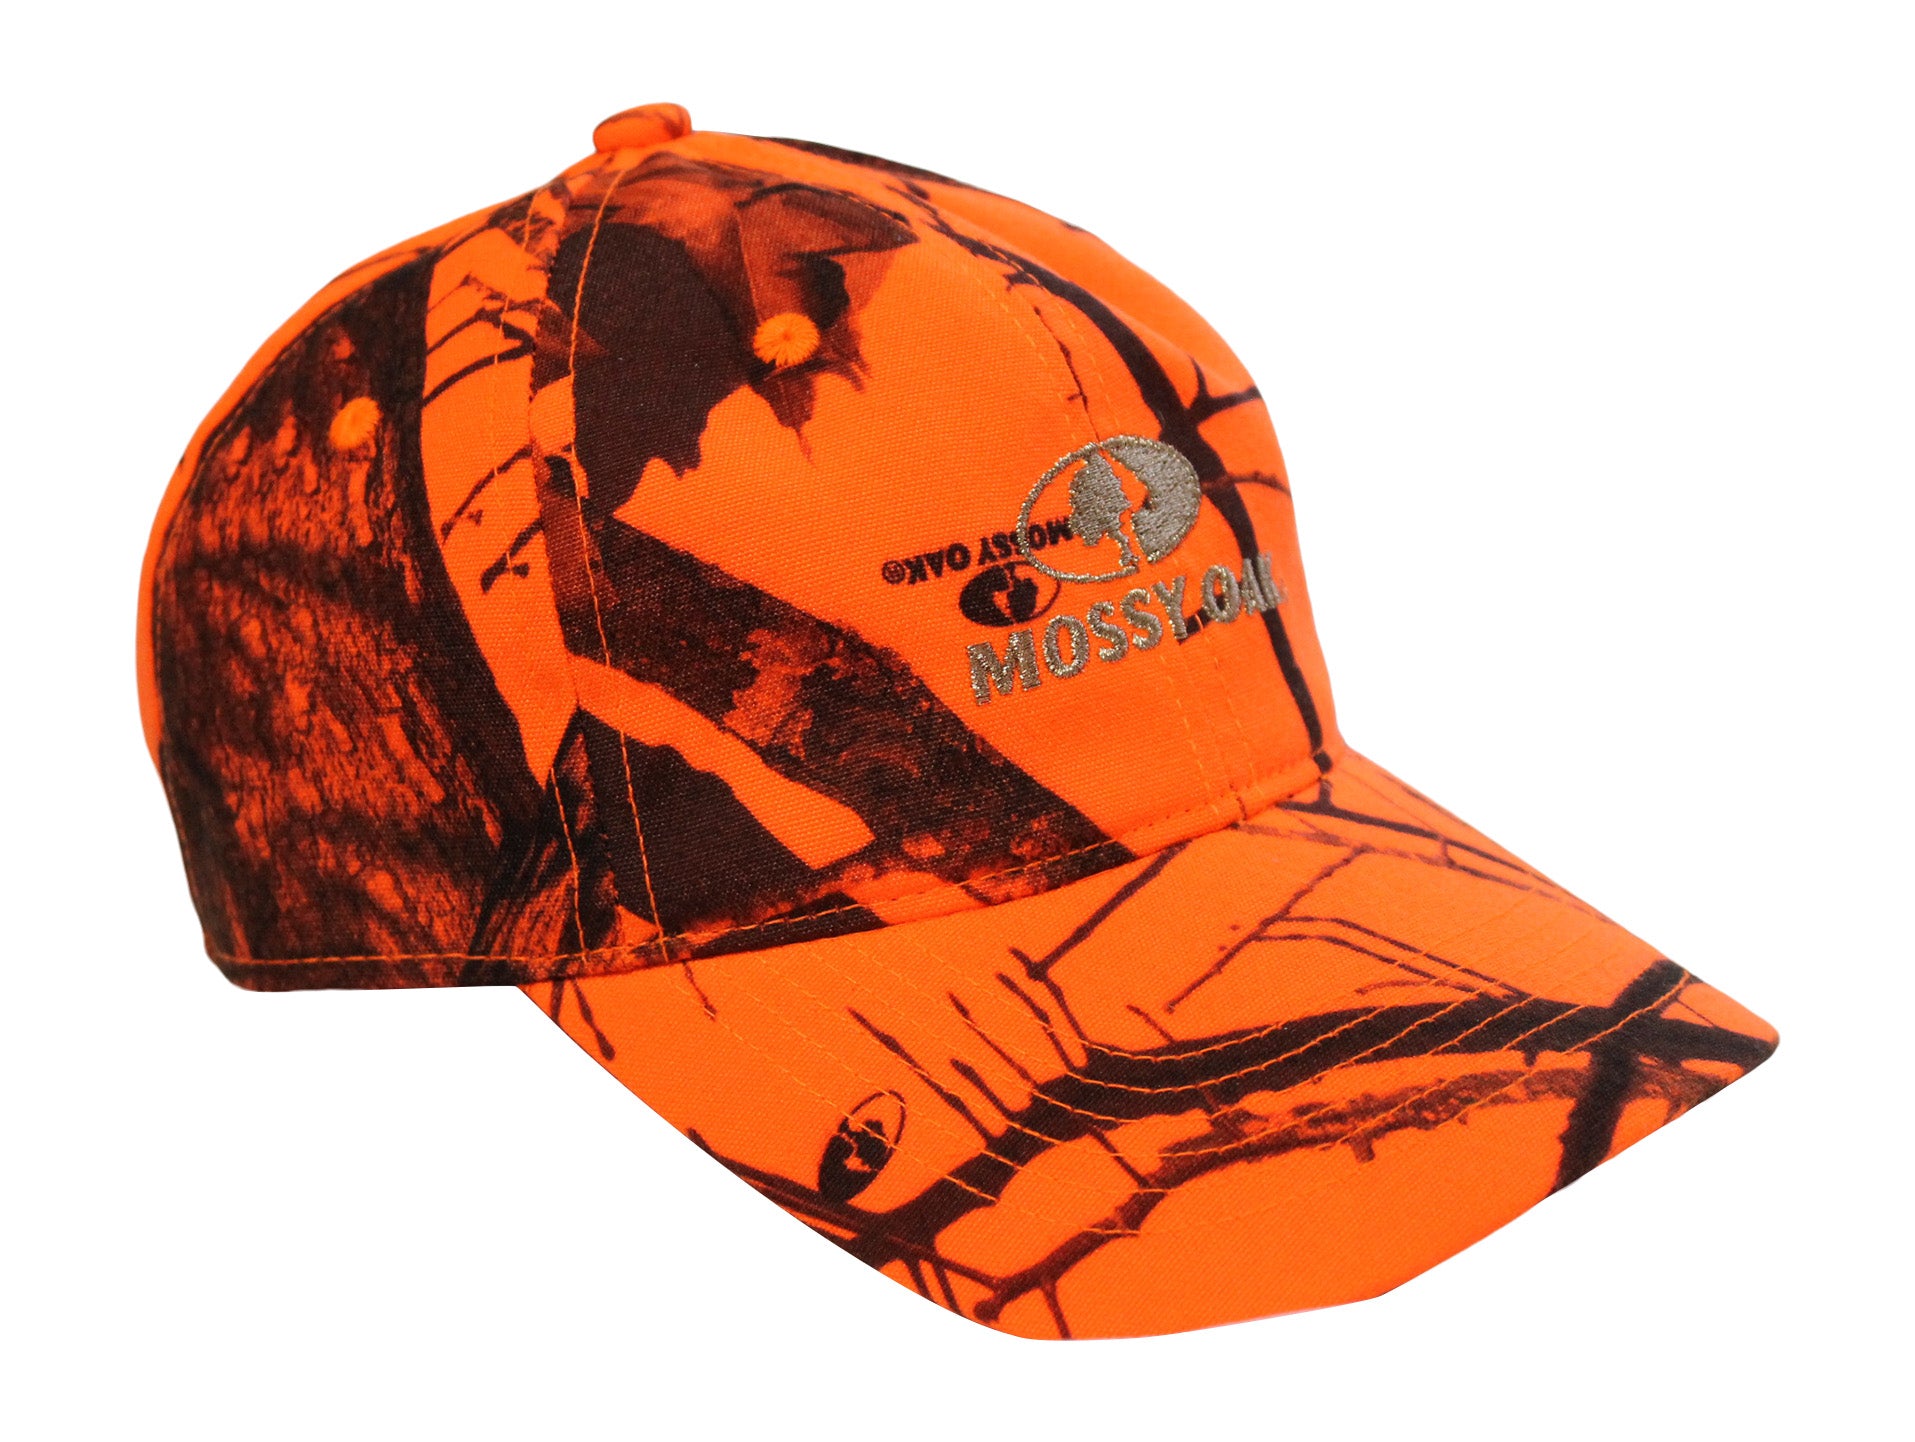 Mossy Oak Camouflage Polyester Hats for Men for sale